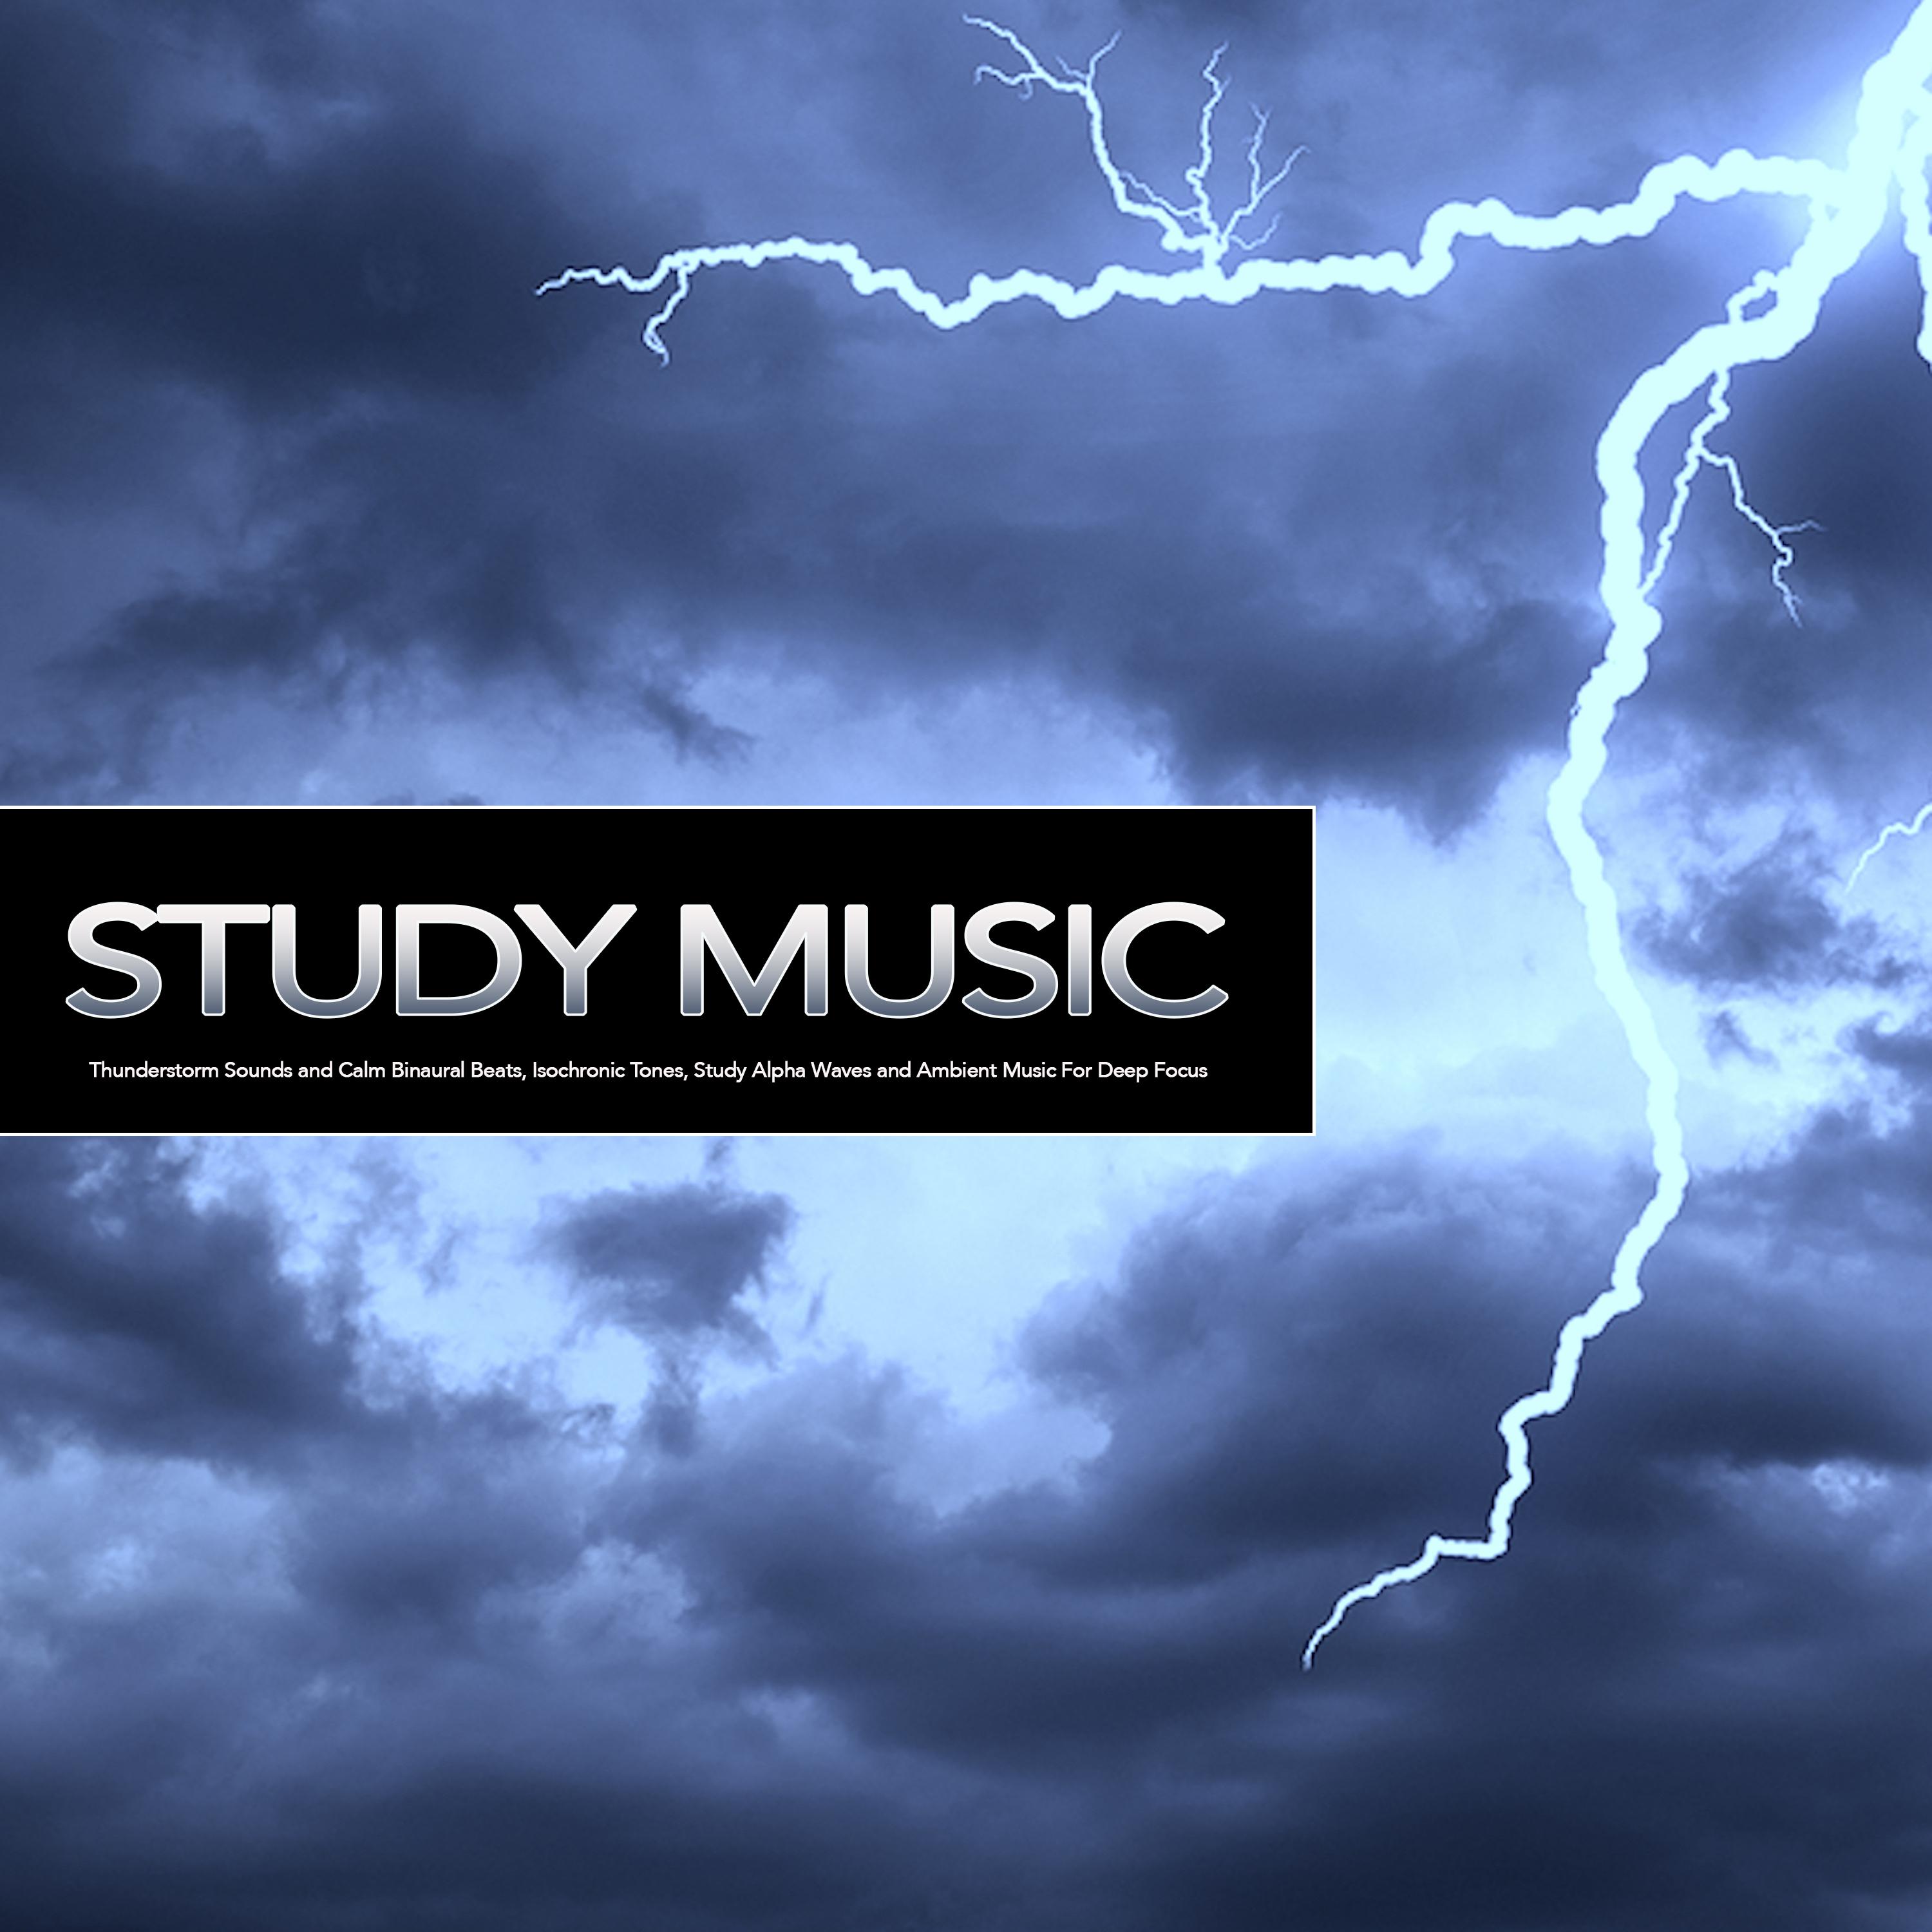 Thunderstorm Sounds and Music For Concentration